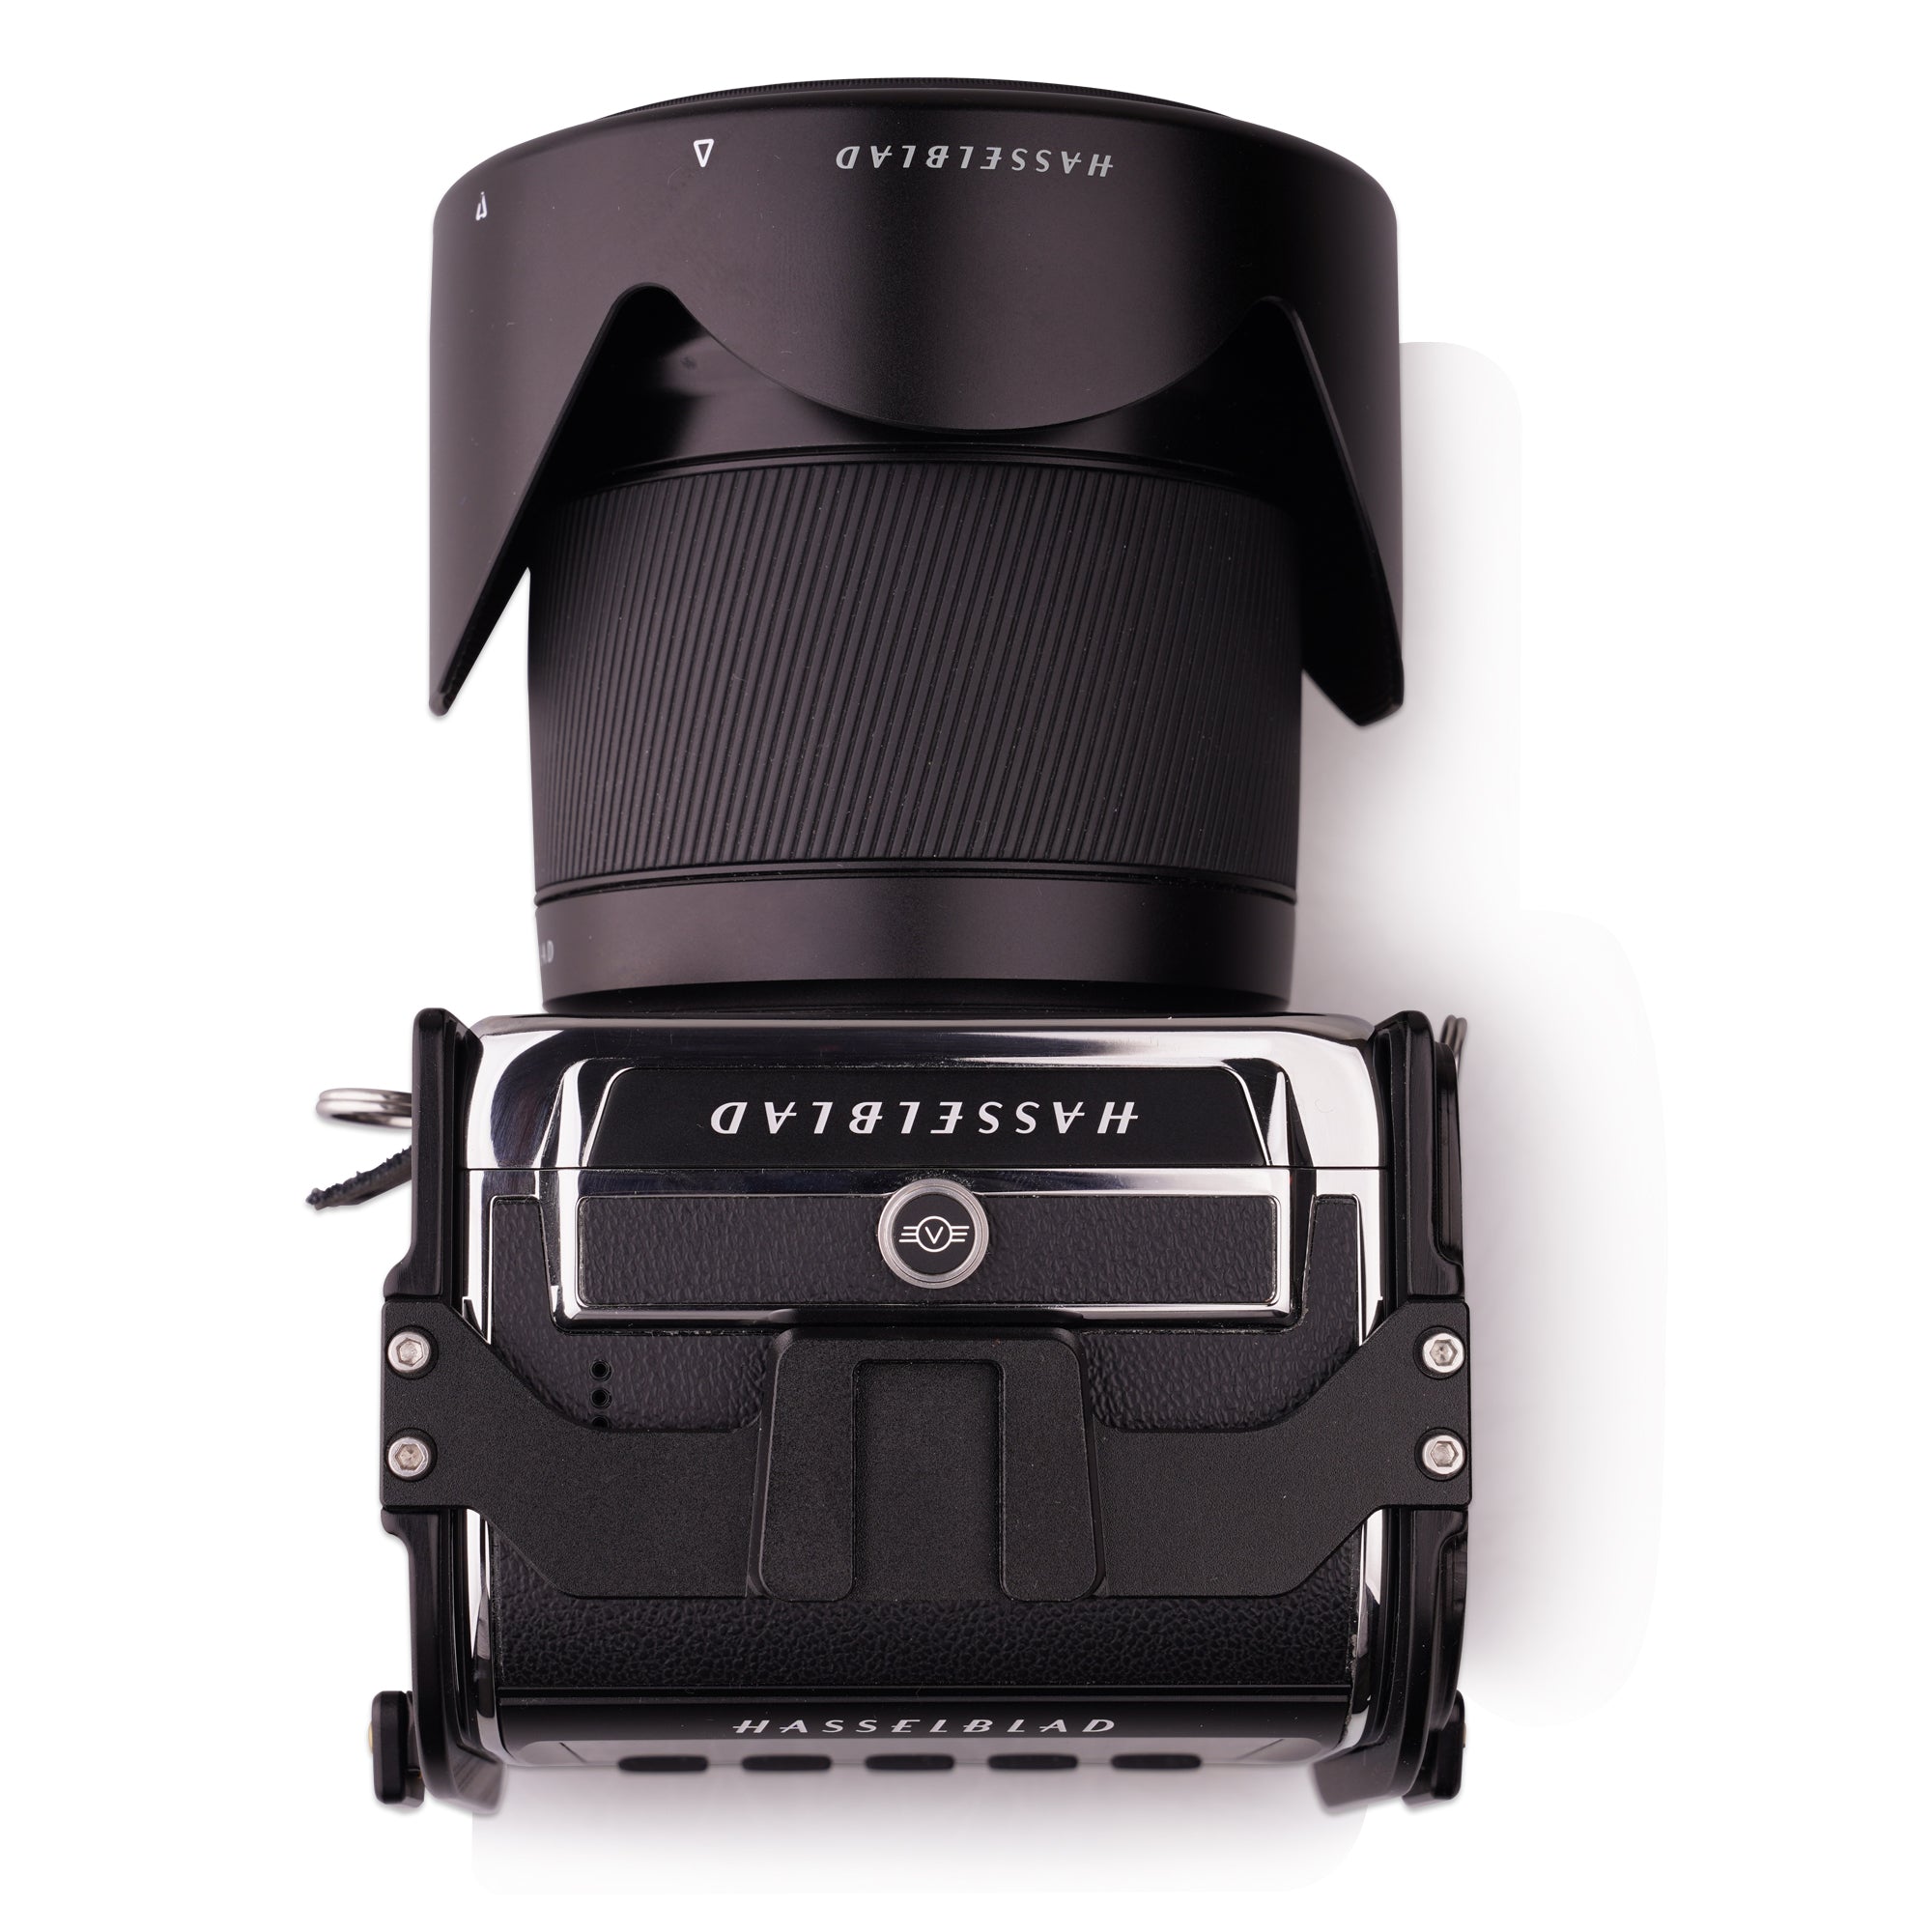 Lanhorse Camera Cage for Hasselblad 907x, 2nd Generation. Ultra-thin, ultra-light, portable. No Wood Handle.